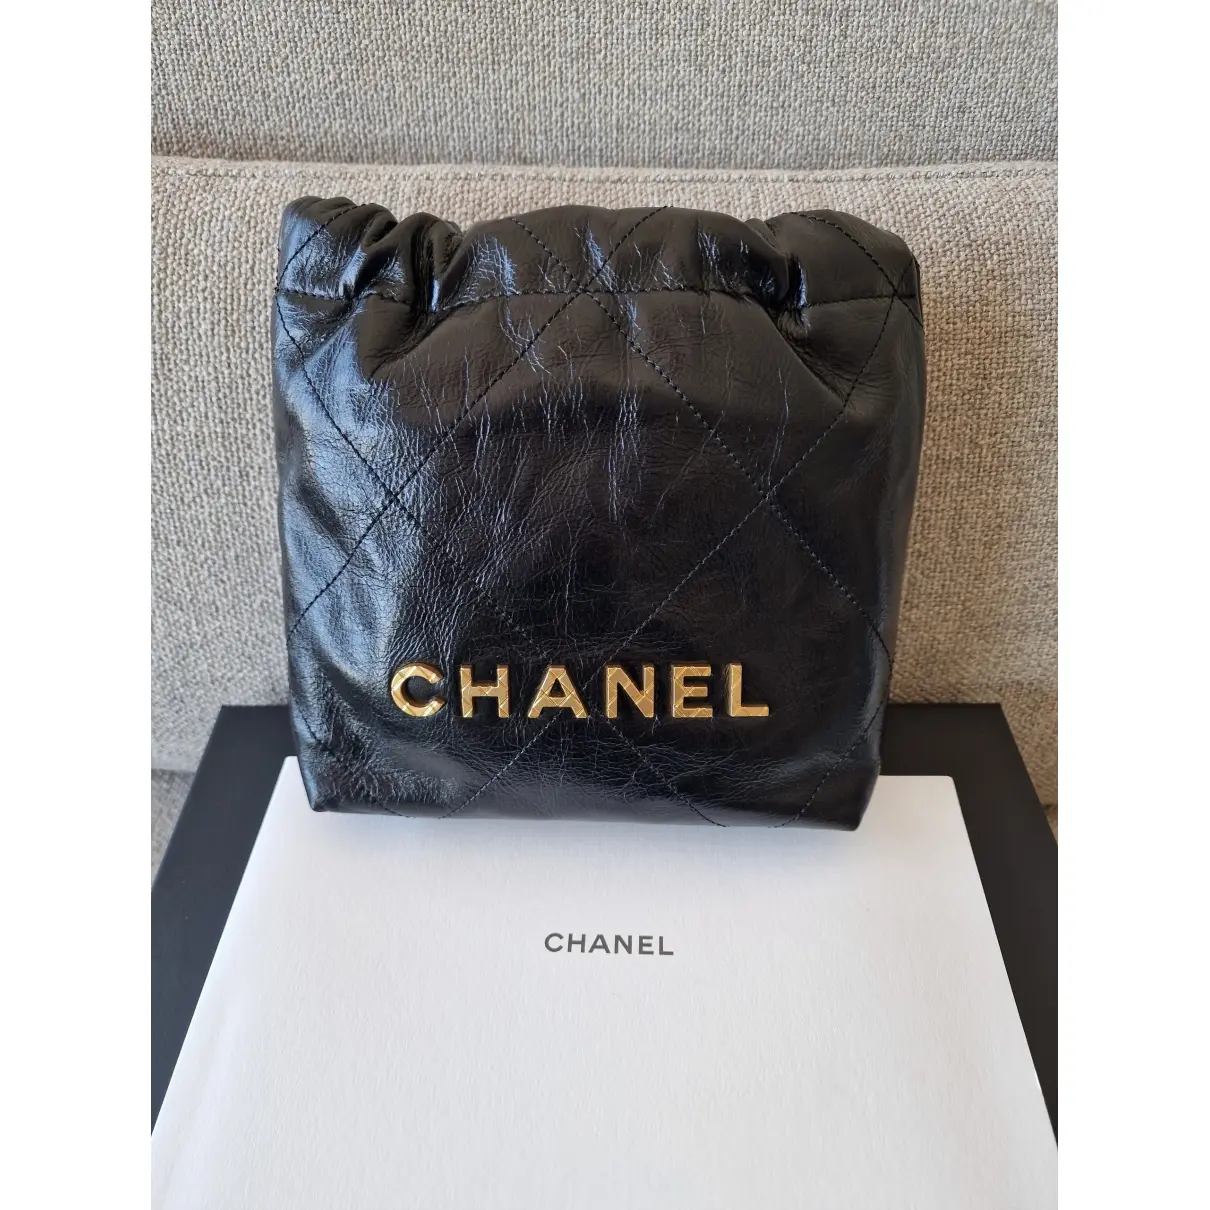 Buy Chanel Chanel 22 leather bag online